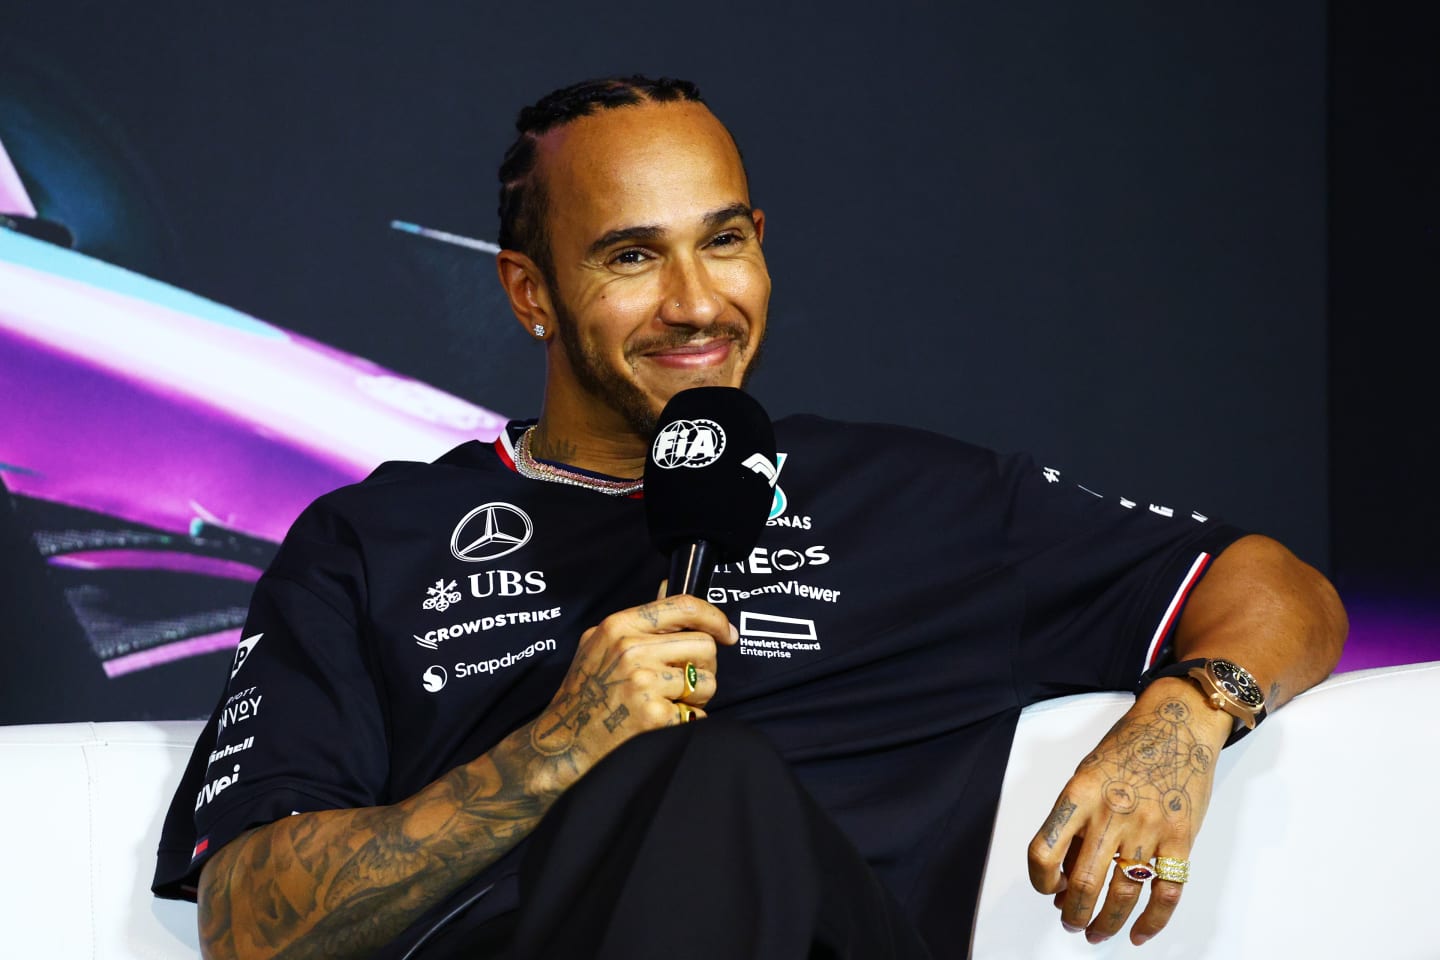 MIAMI, FLORIDA - MAY 02: Lewis Hamilton of Great Britain and Mercedes attends the Drivers Press